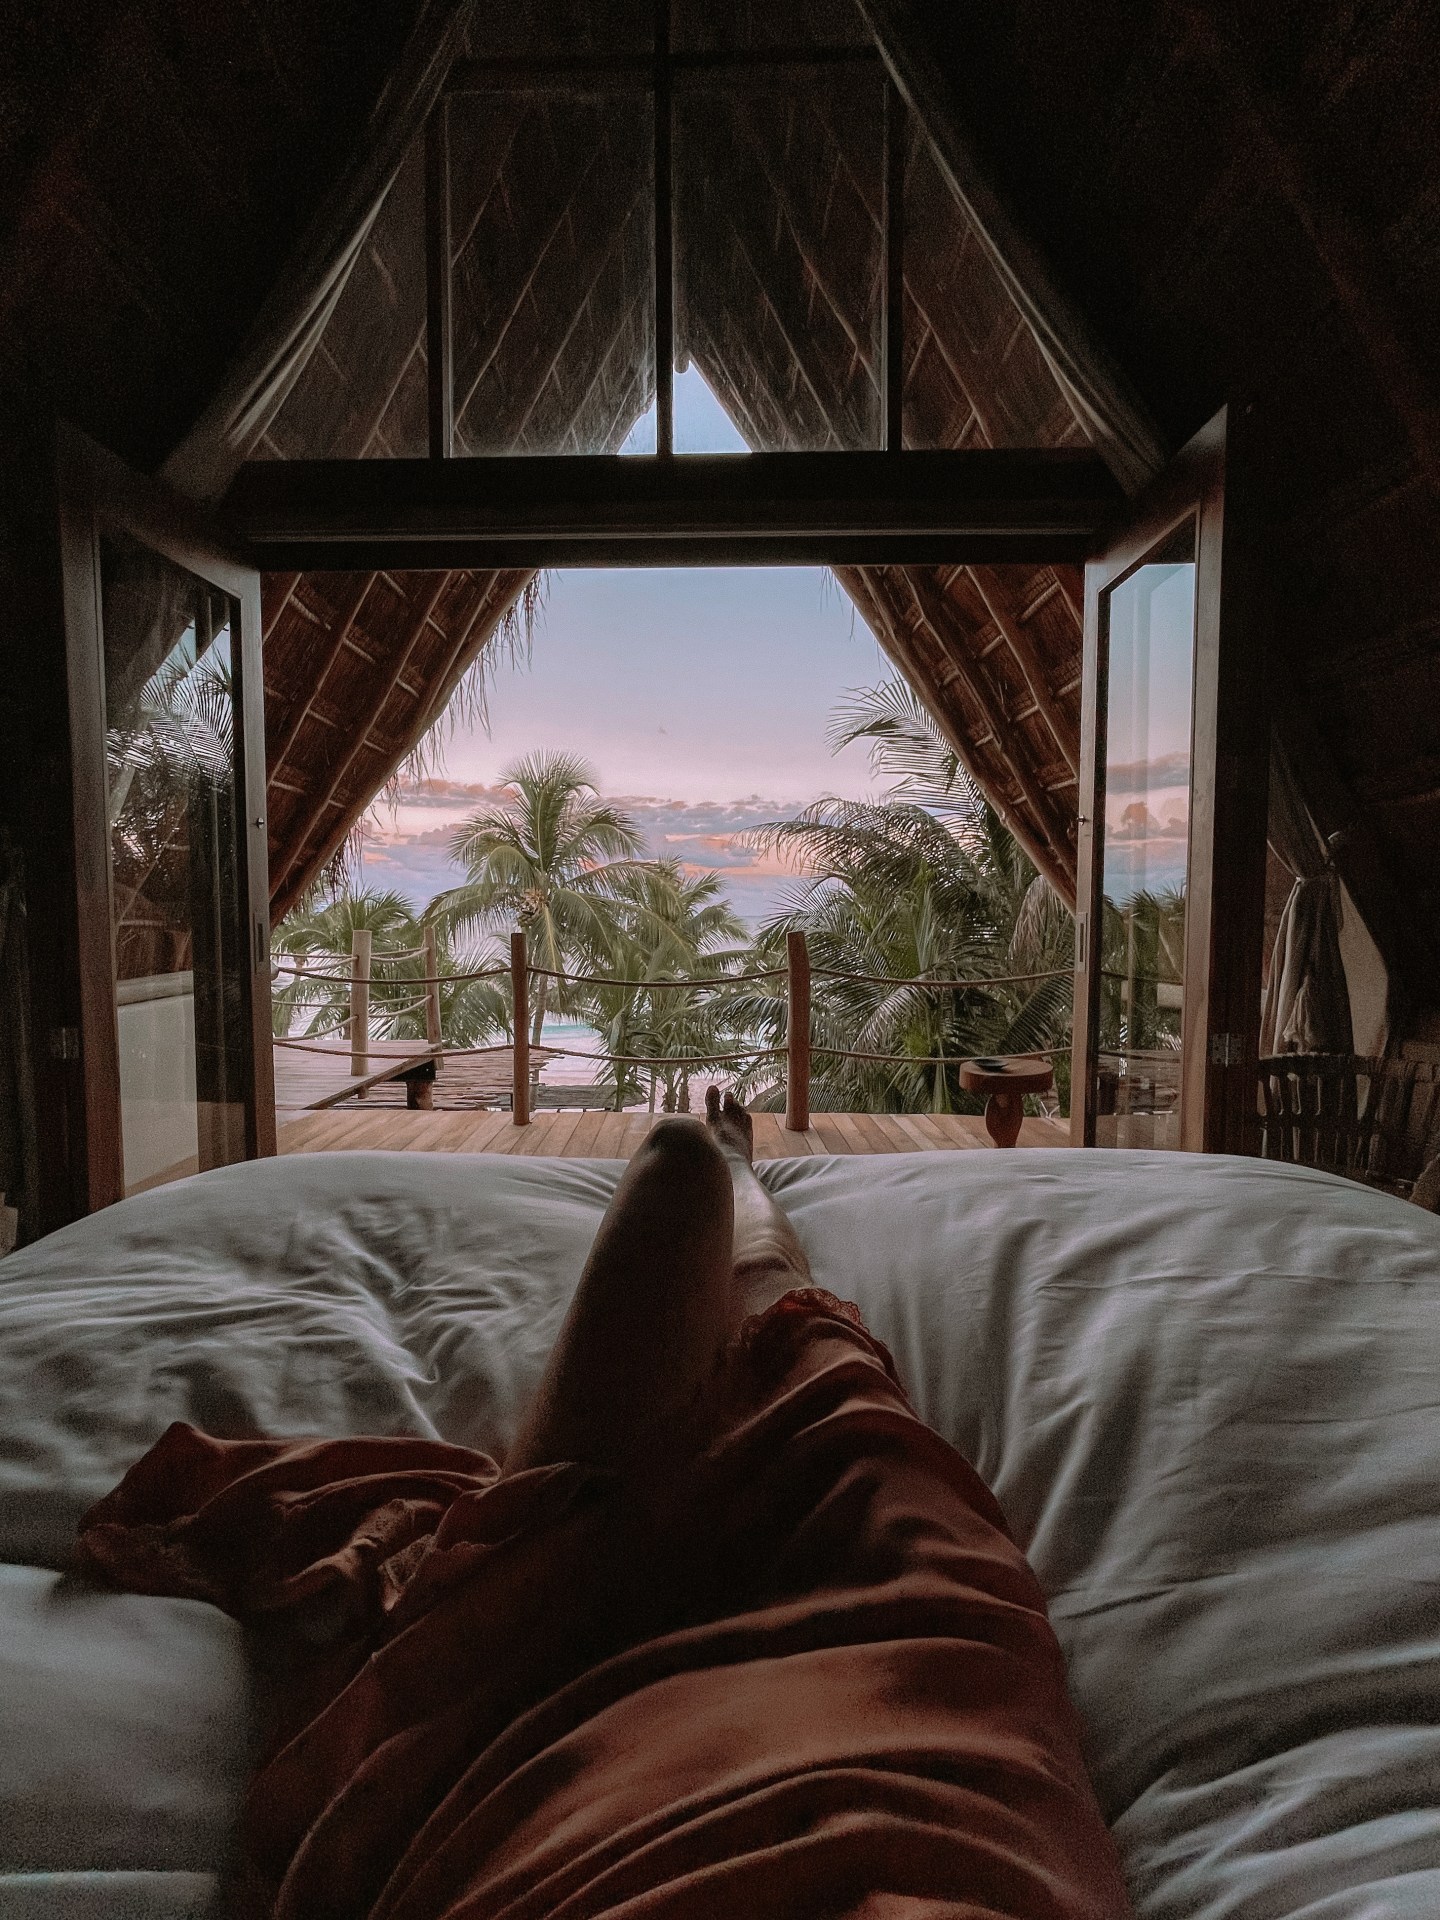 The sunset view laying in bed at La Valise hotel in Tulum Mexico